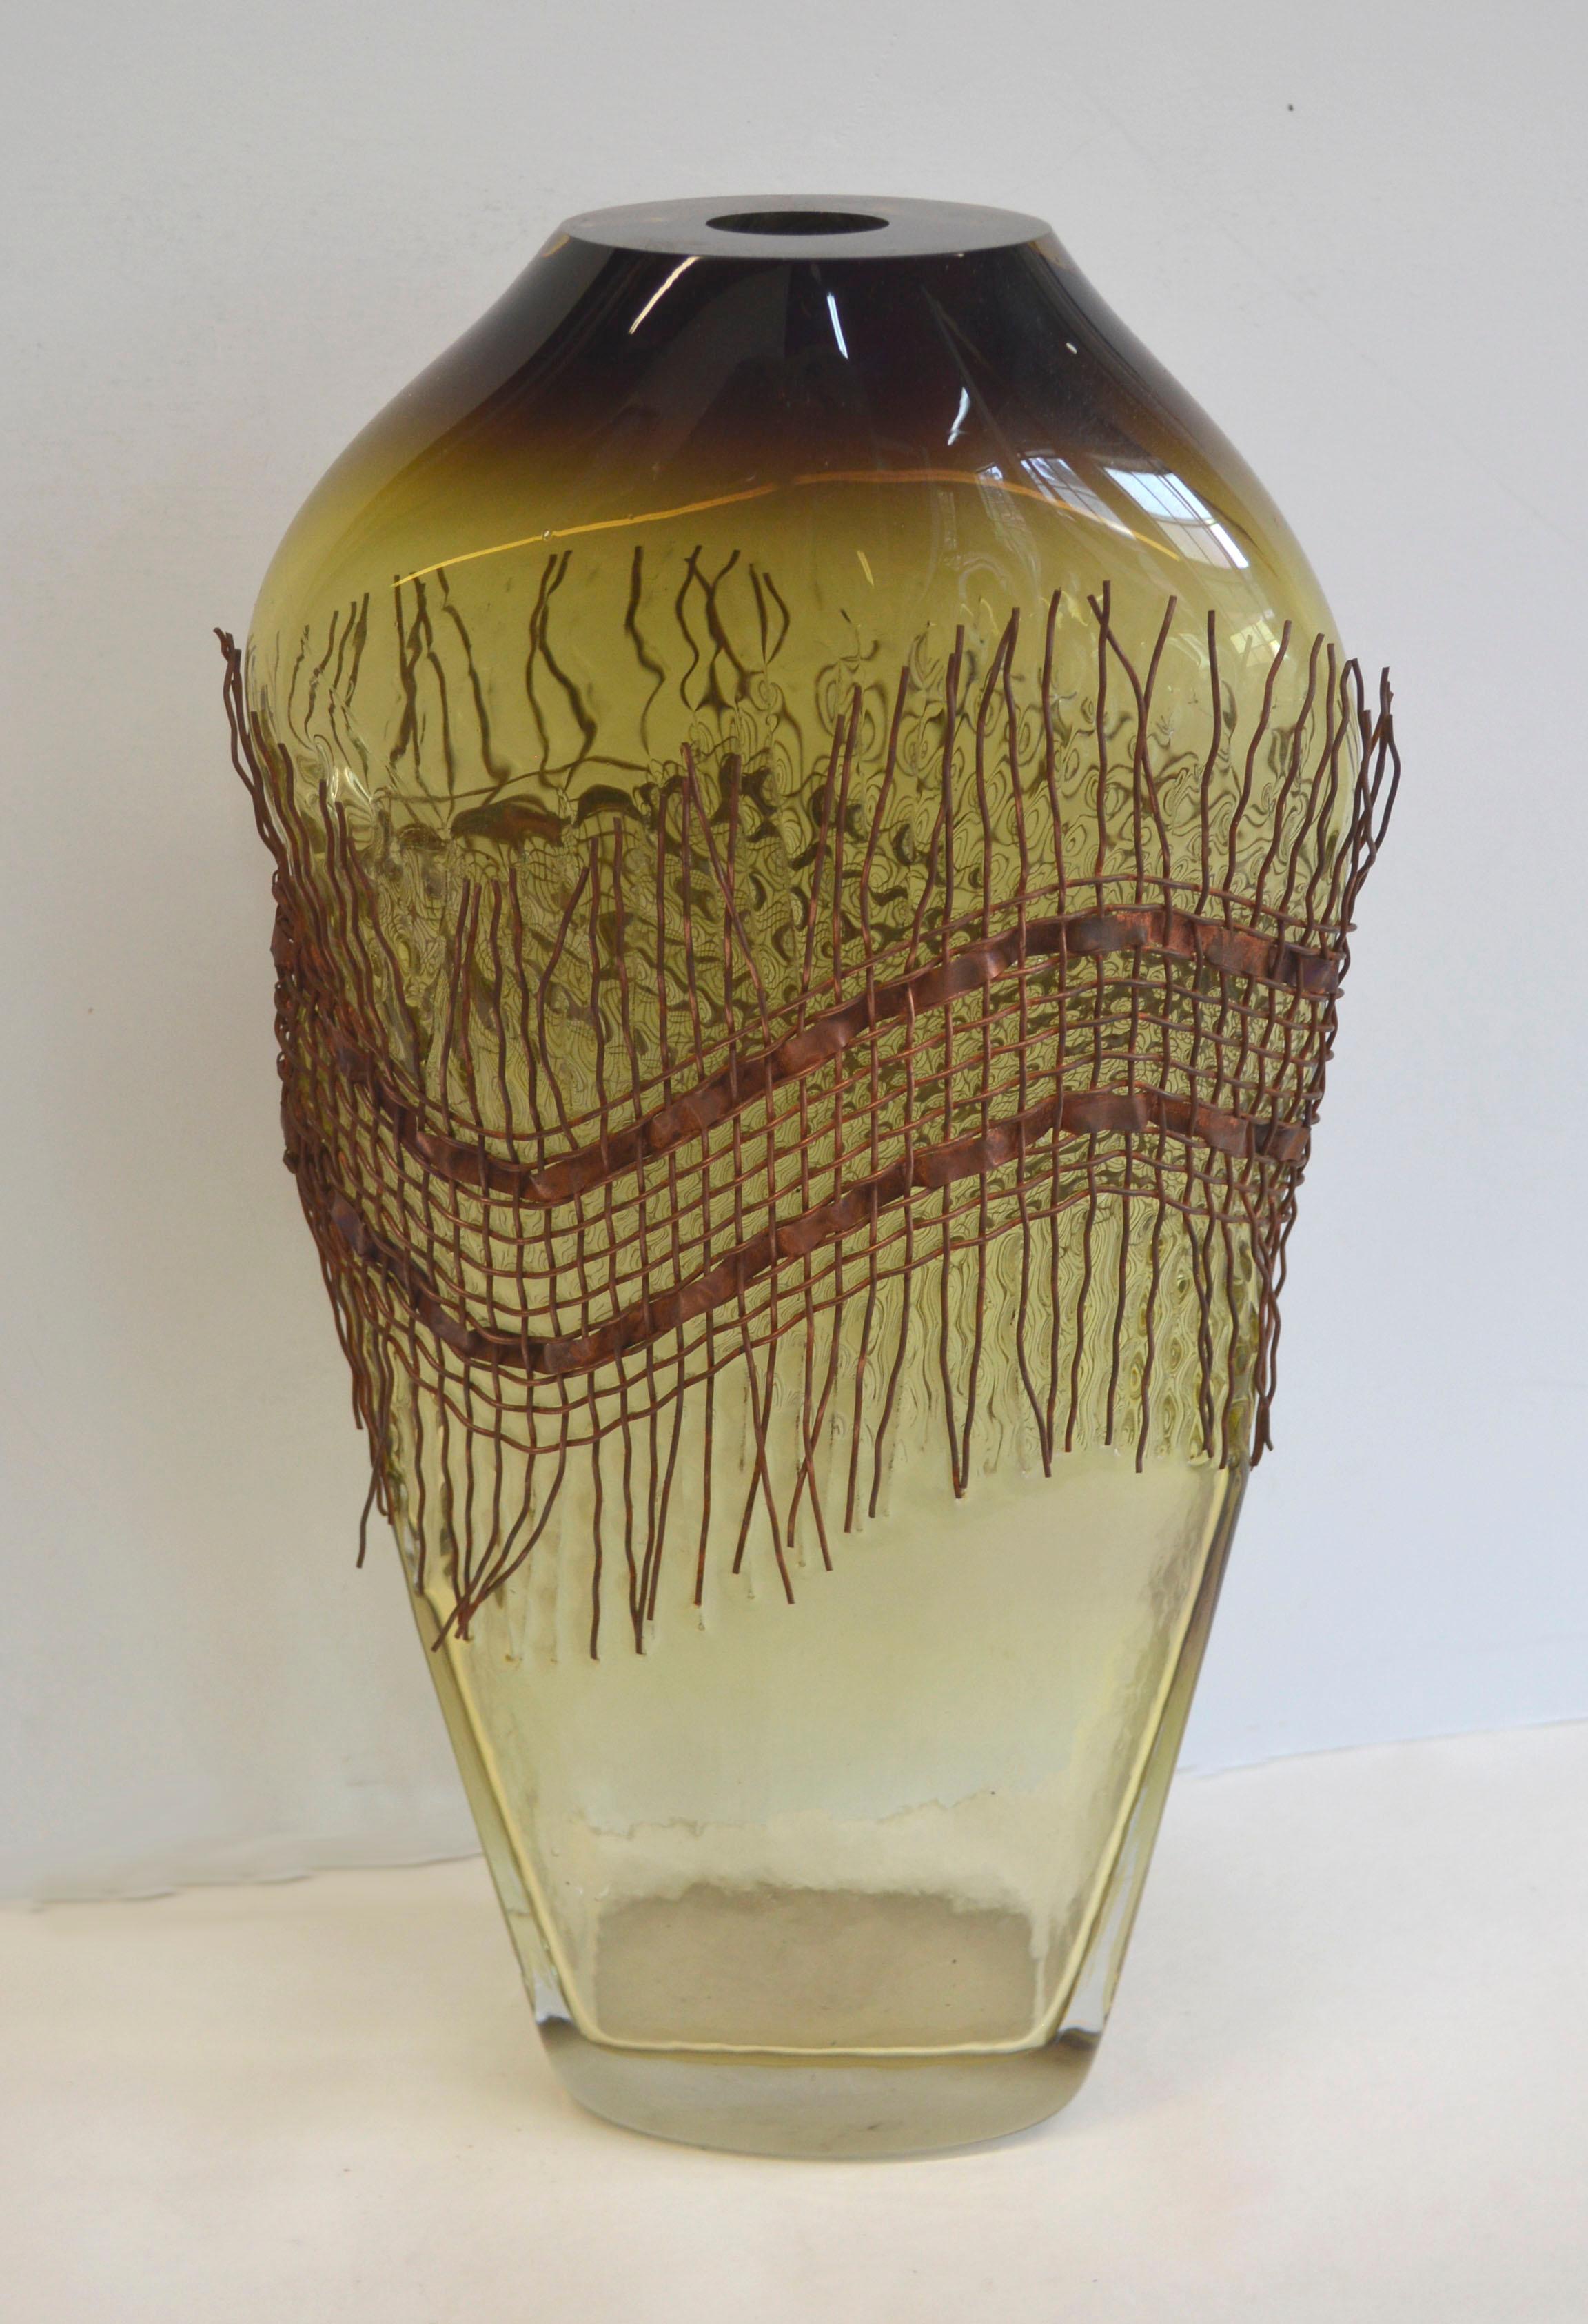 Stunning modernist glass blown vase wrapped in Brutalist style copper woven wire. By Jim and Connie Grant (American, 20th Century), 2005. Etched on bottom 